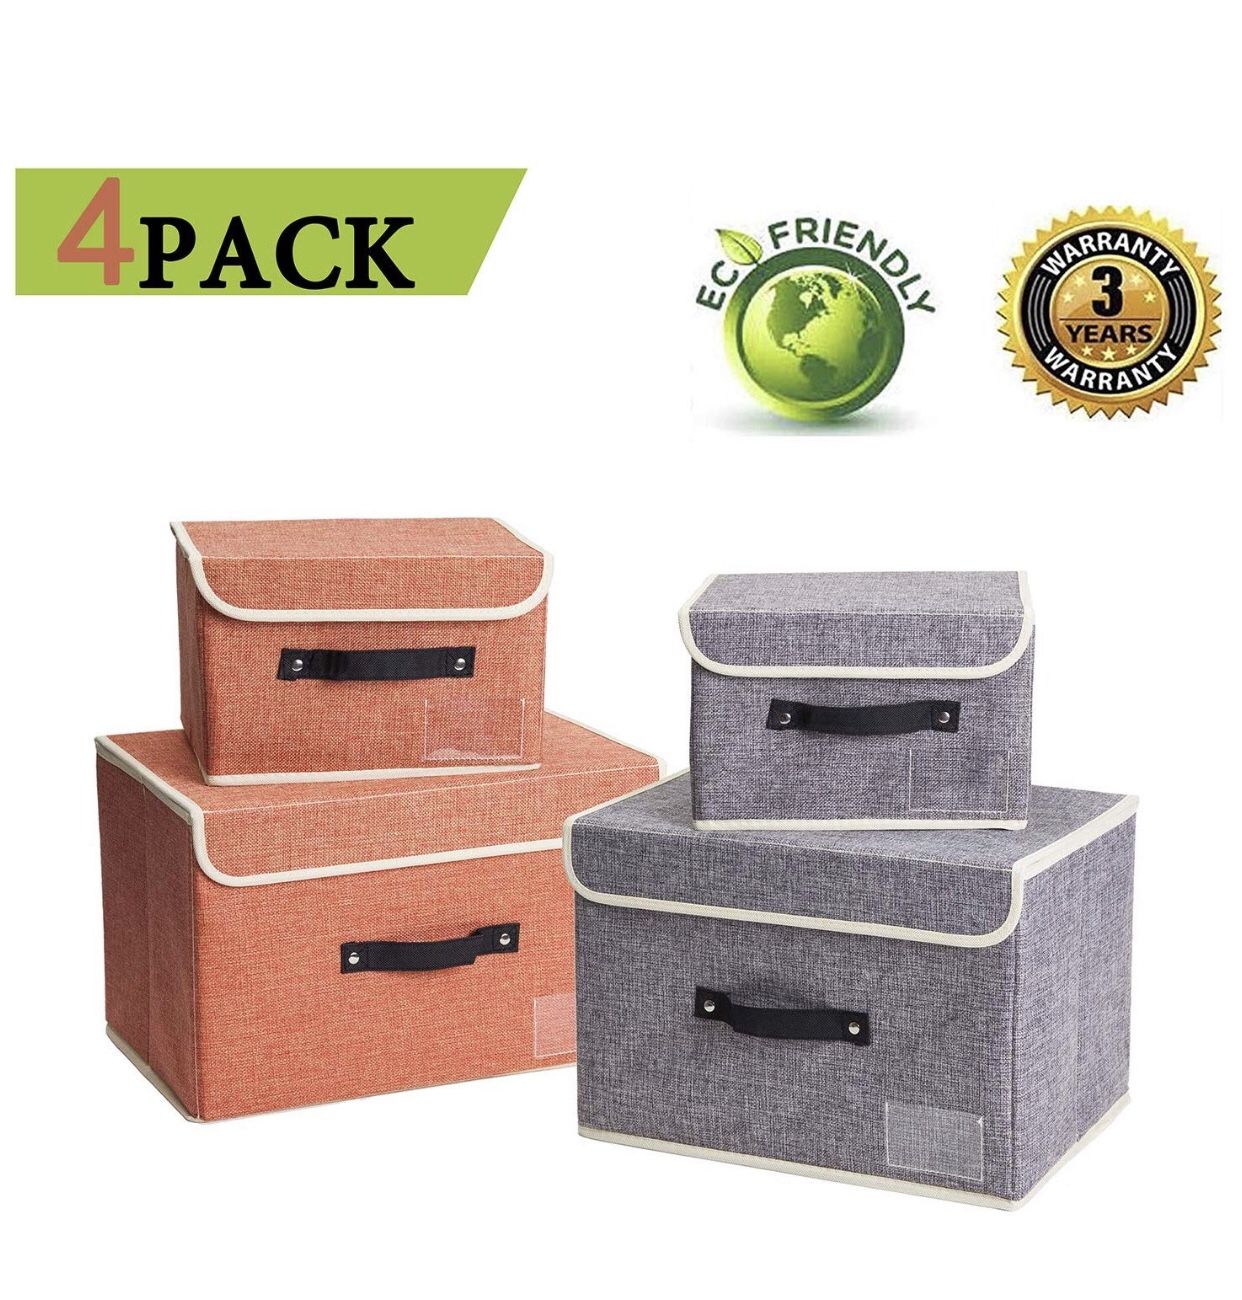 Home 4 Pack Storage Bins Boxes Linen Collapsible Cube Set Organizer Basket with Lid & Handle, Foldable Fabric Containers for Clothes, Toys, Closet, O